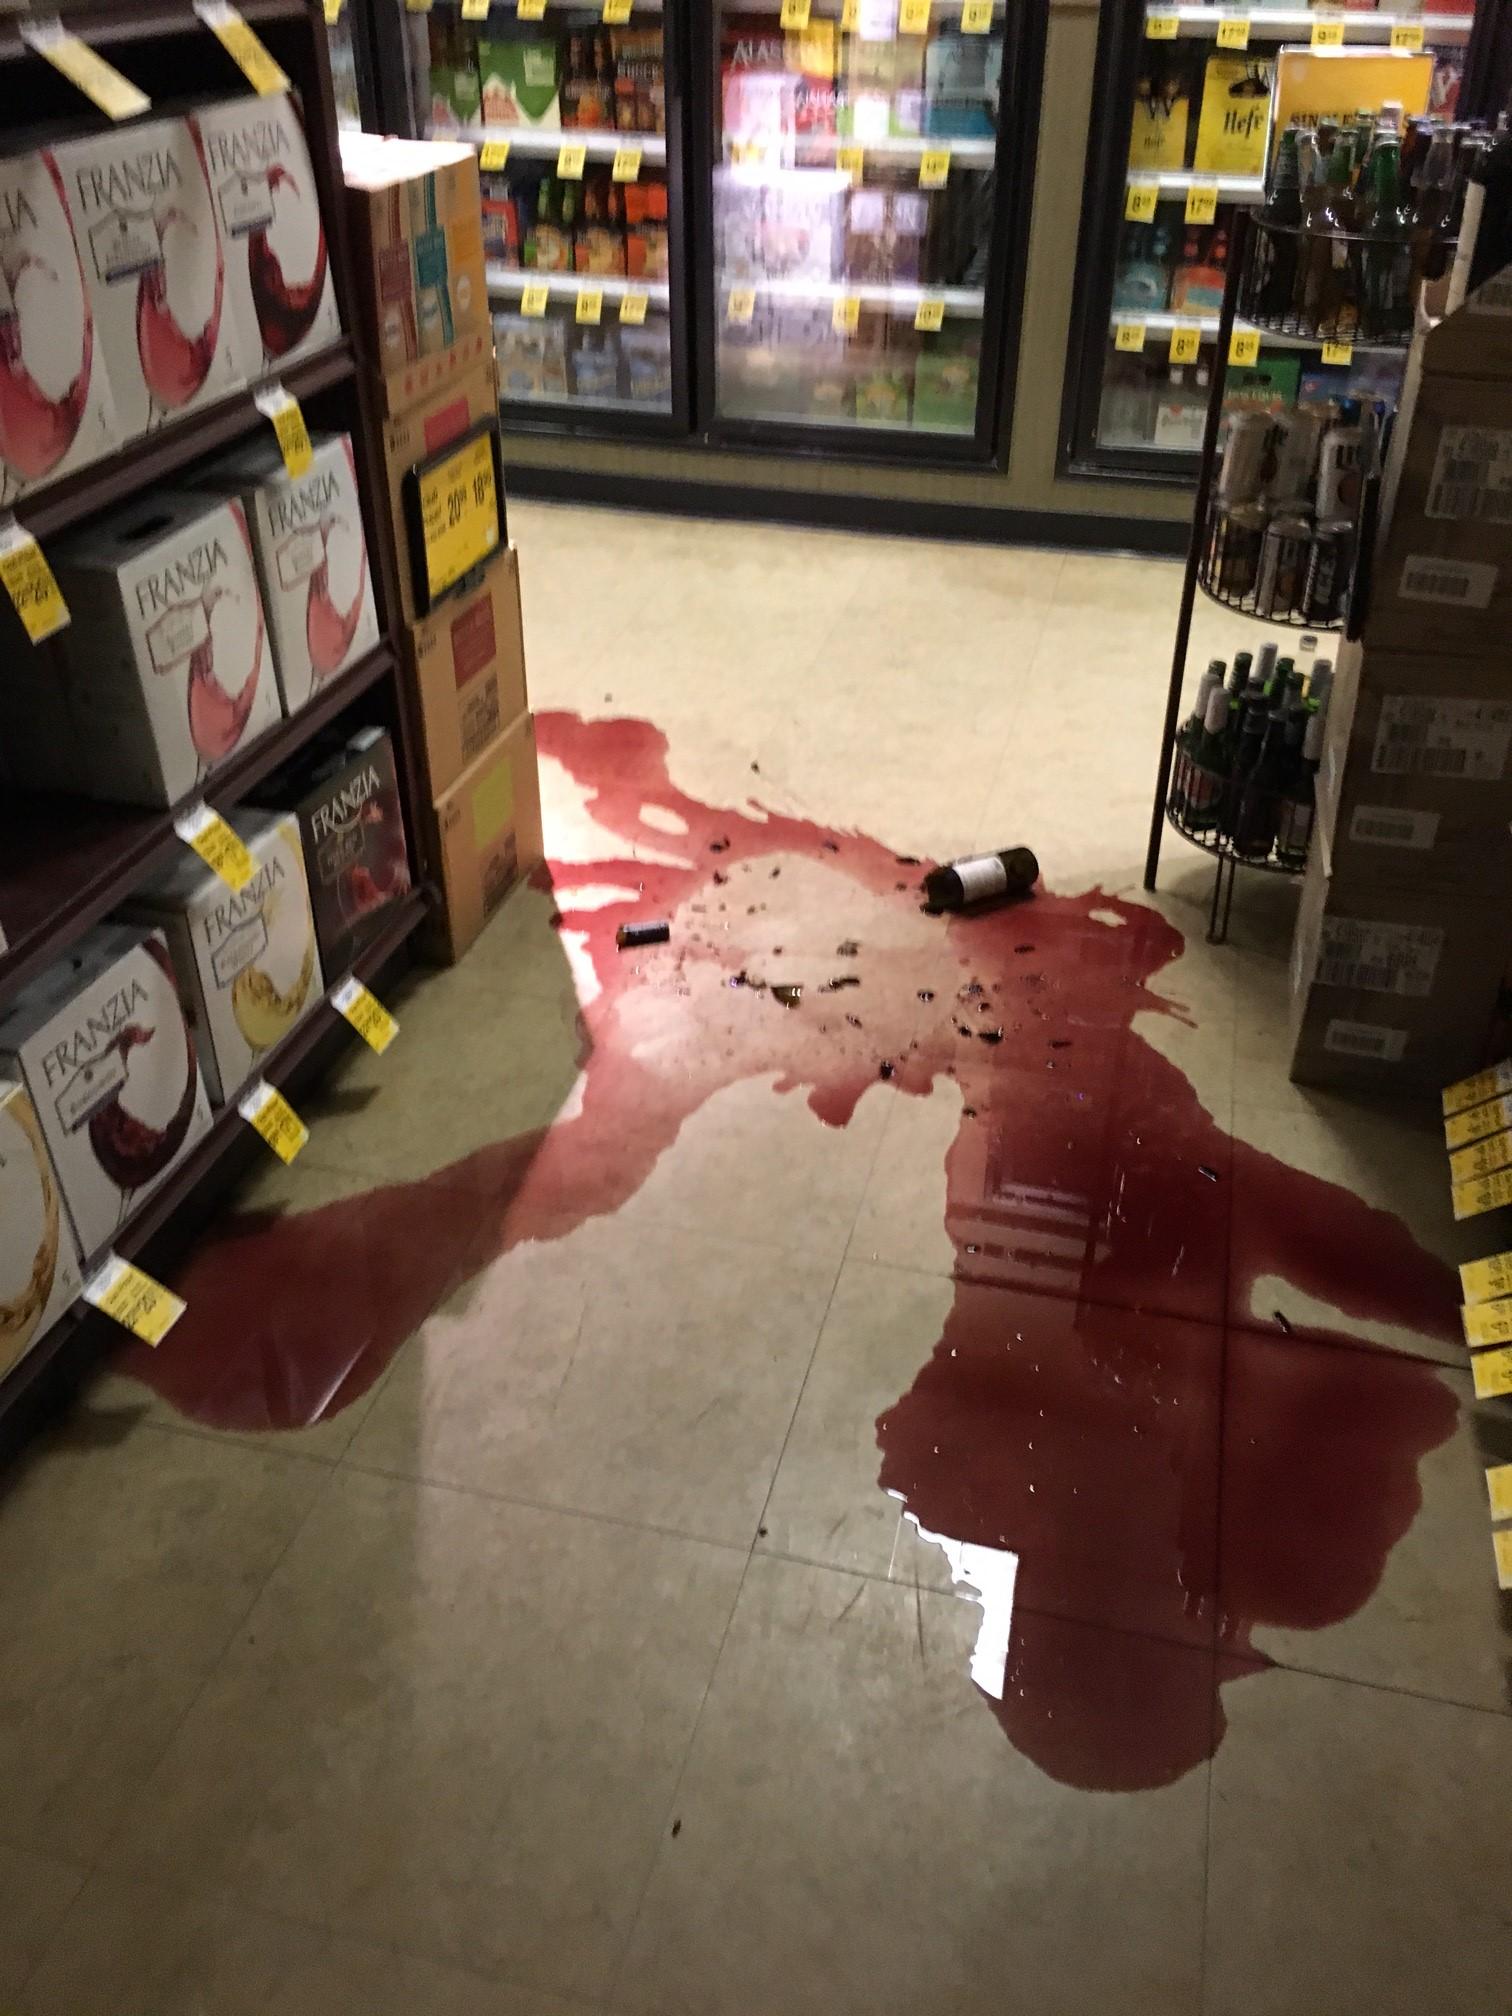 Broken wine bottle in Safeway liquor store (Photo By Perry Lynn, Carrs/Safeway Grocery Manager)